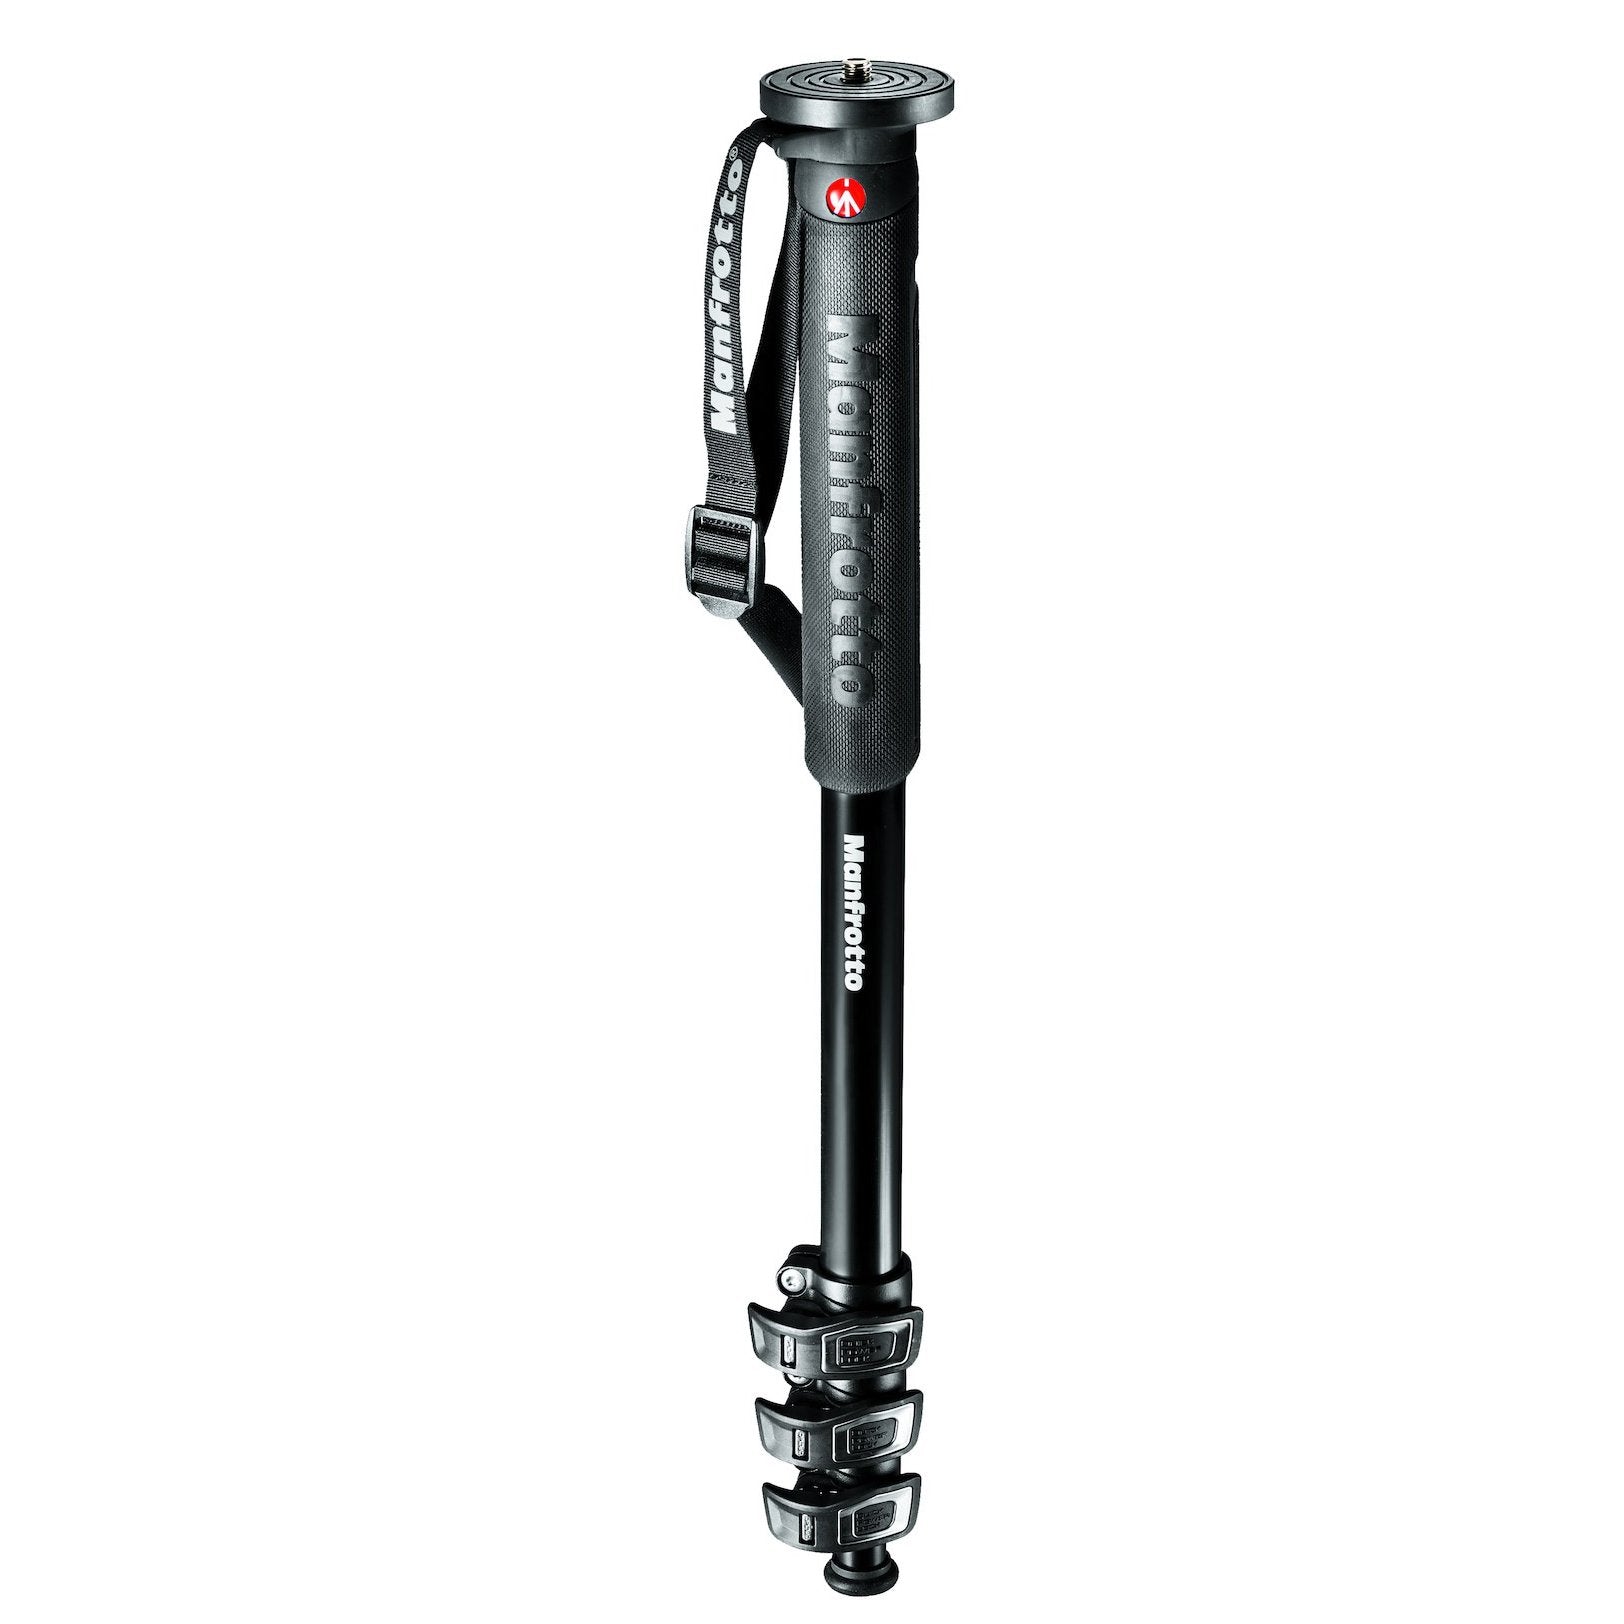 Manfrotto XPRO 4-Section photo monopod, aluminum with Quick power lock Manfrotto Monopods